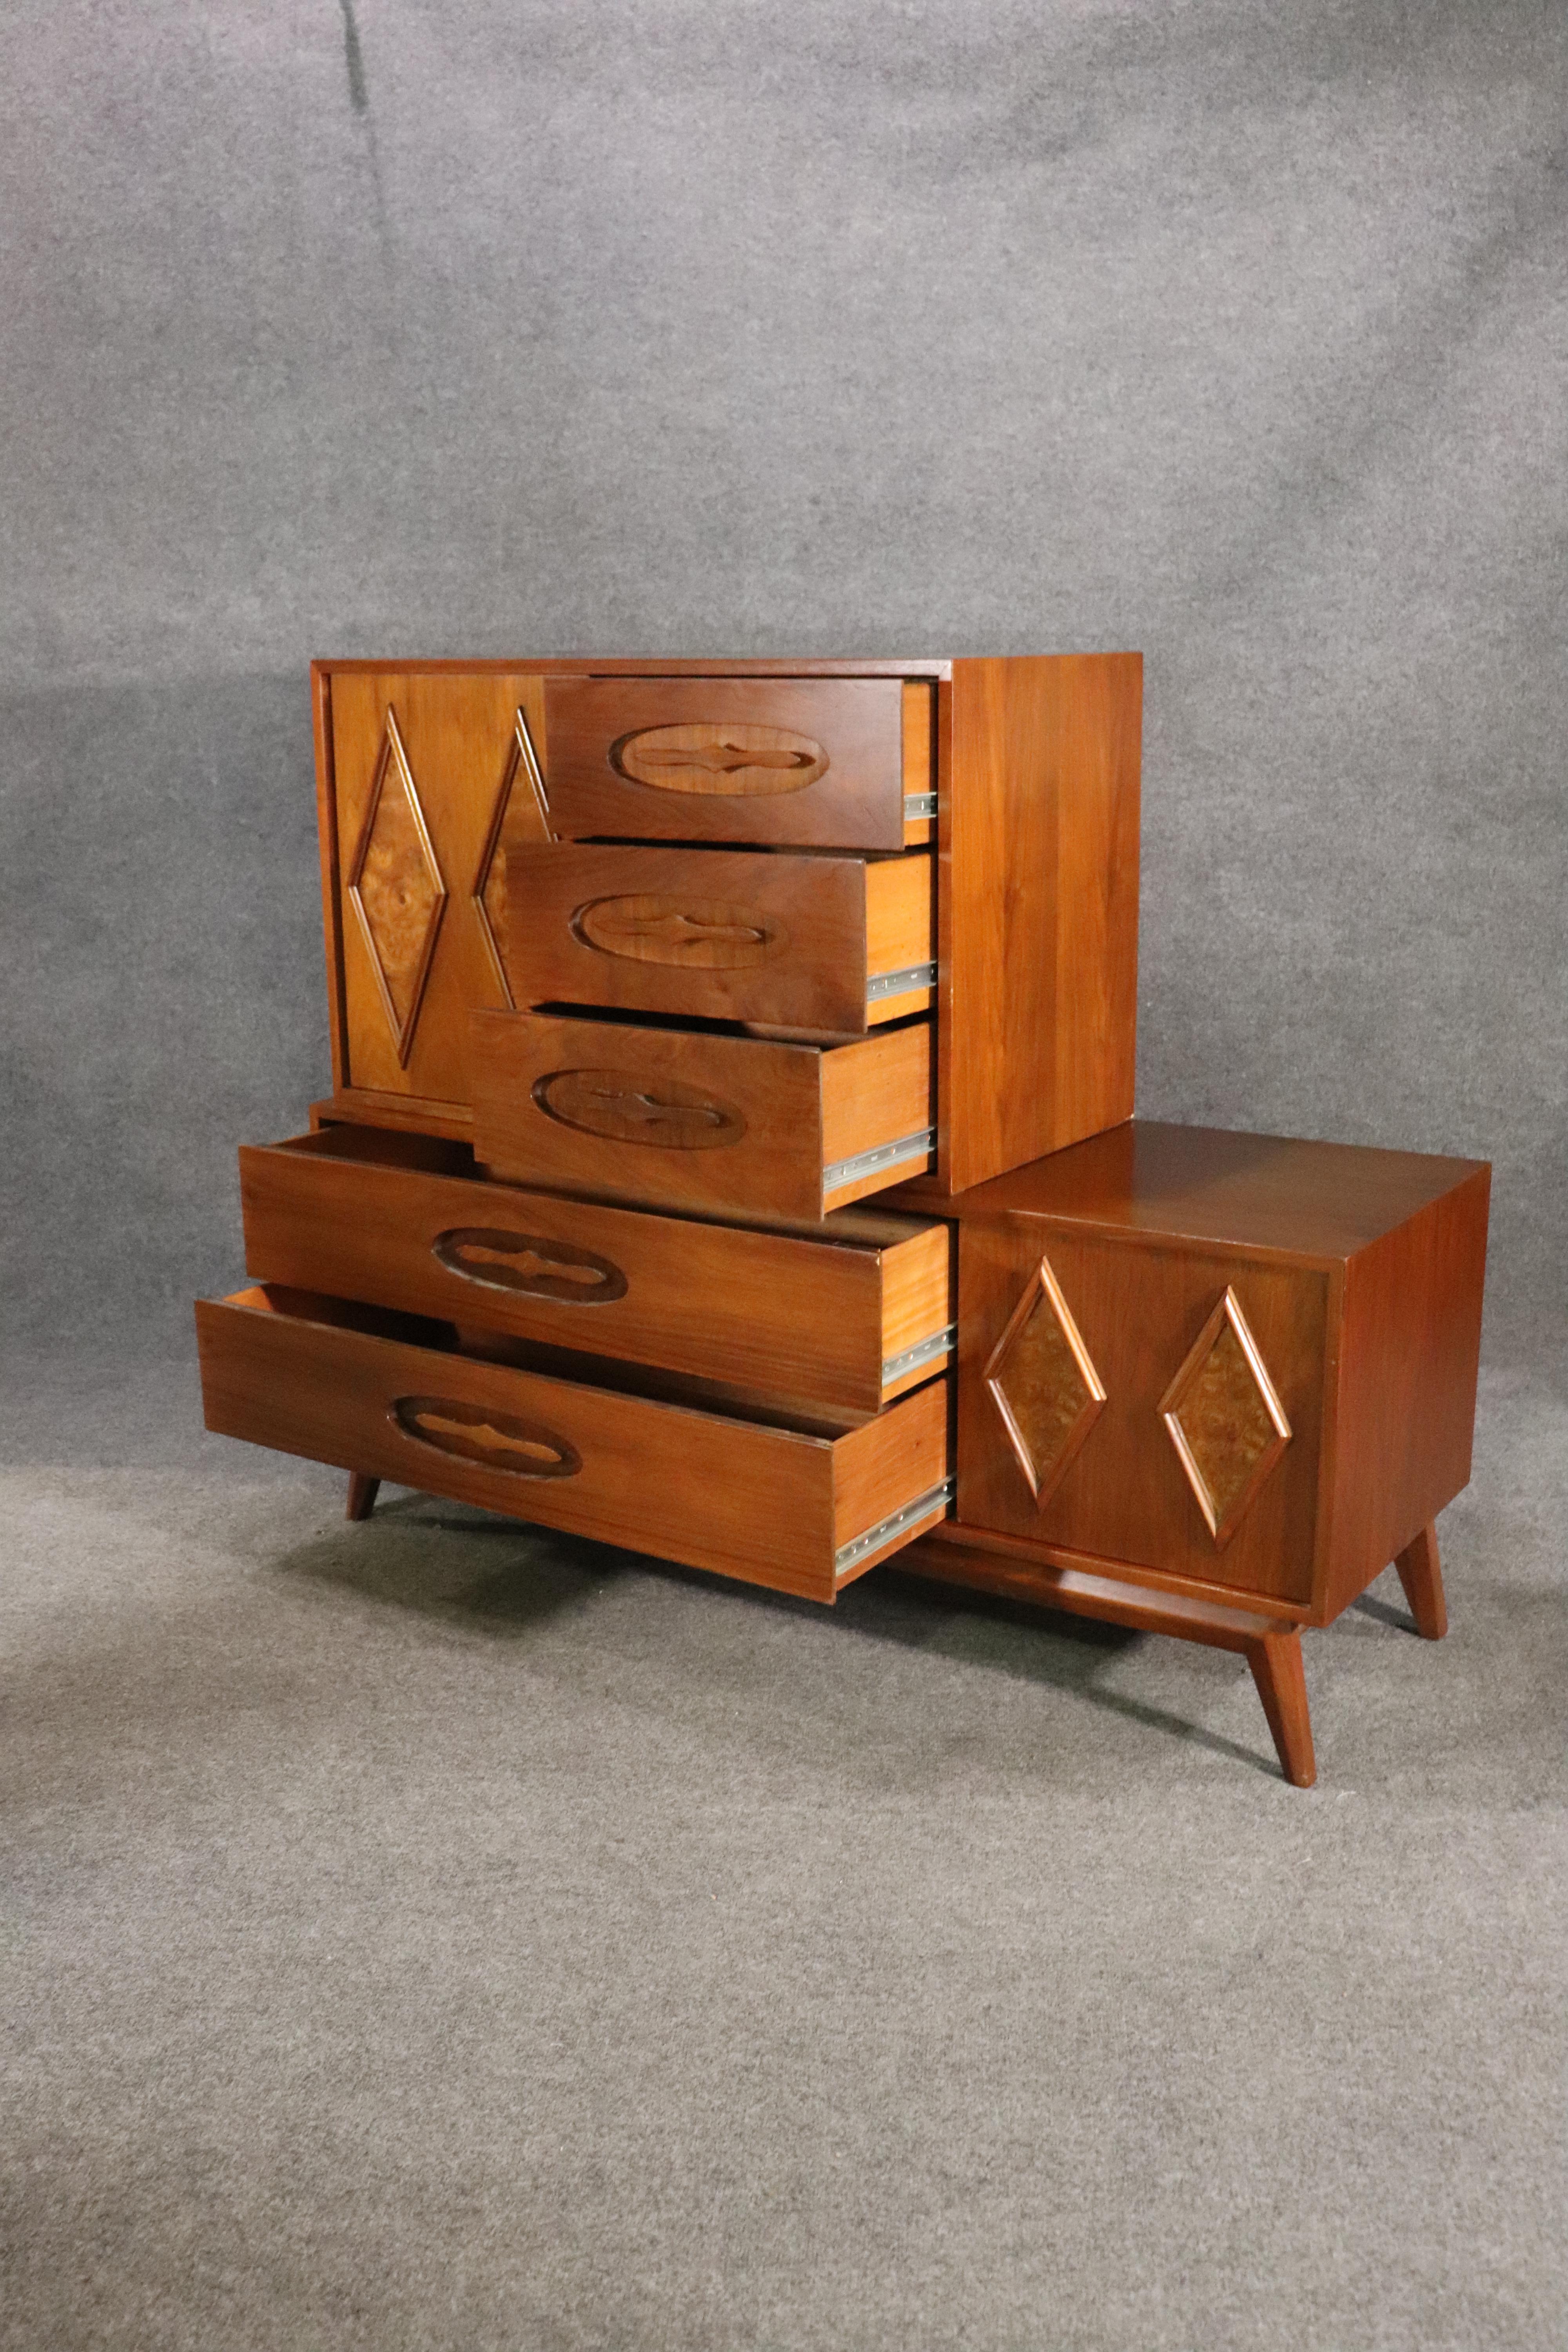 Mid-century modern dresser with sliding doors and ten total drawers. Unique design, featuring an off center top chest. Diamond figures of burl veneer give a handsome accent to the walnut grain.
Please confirm location NY or NJ